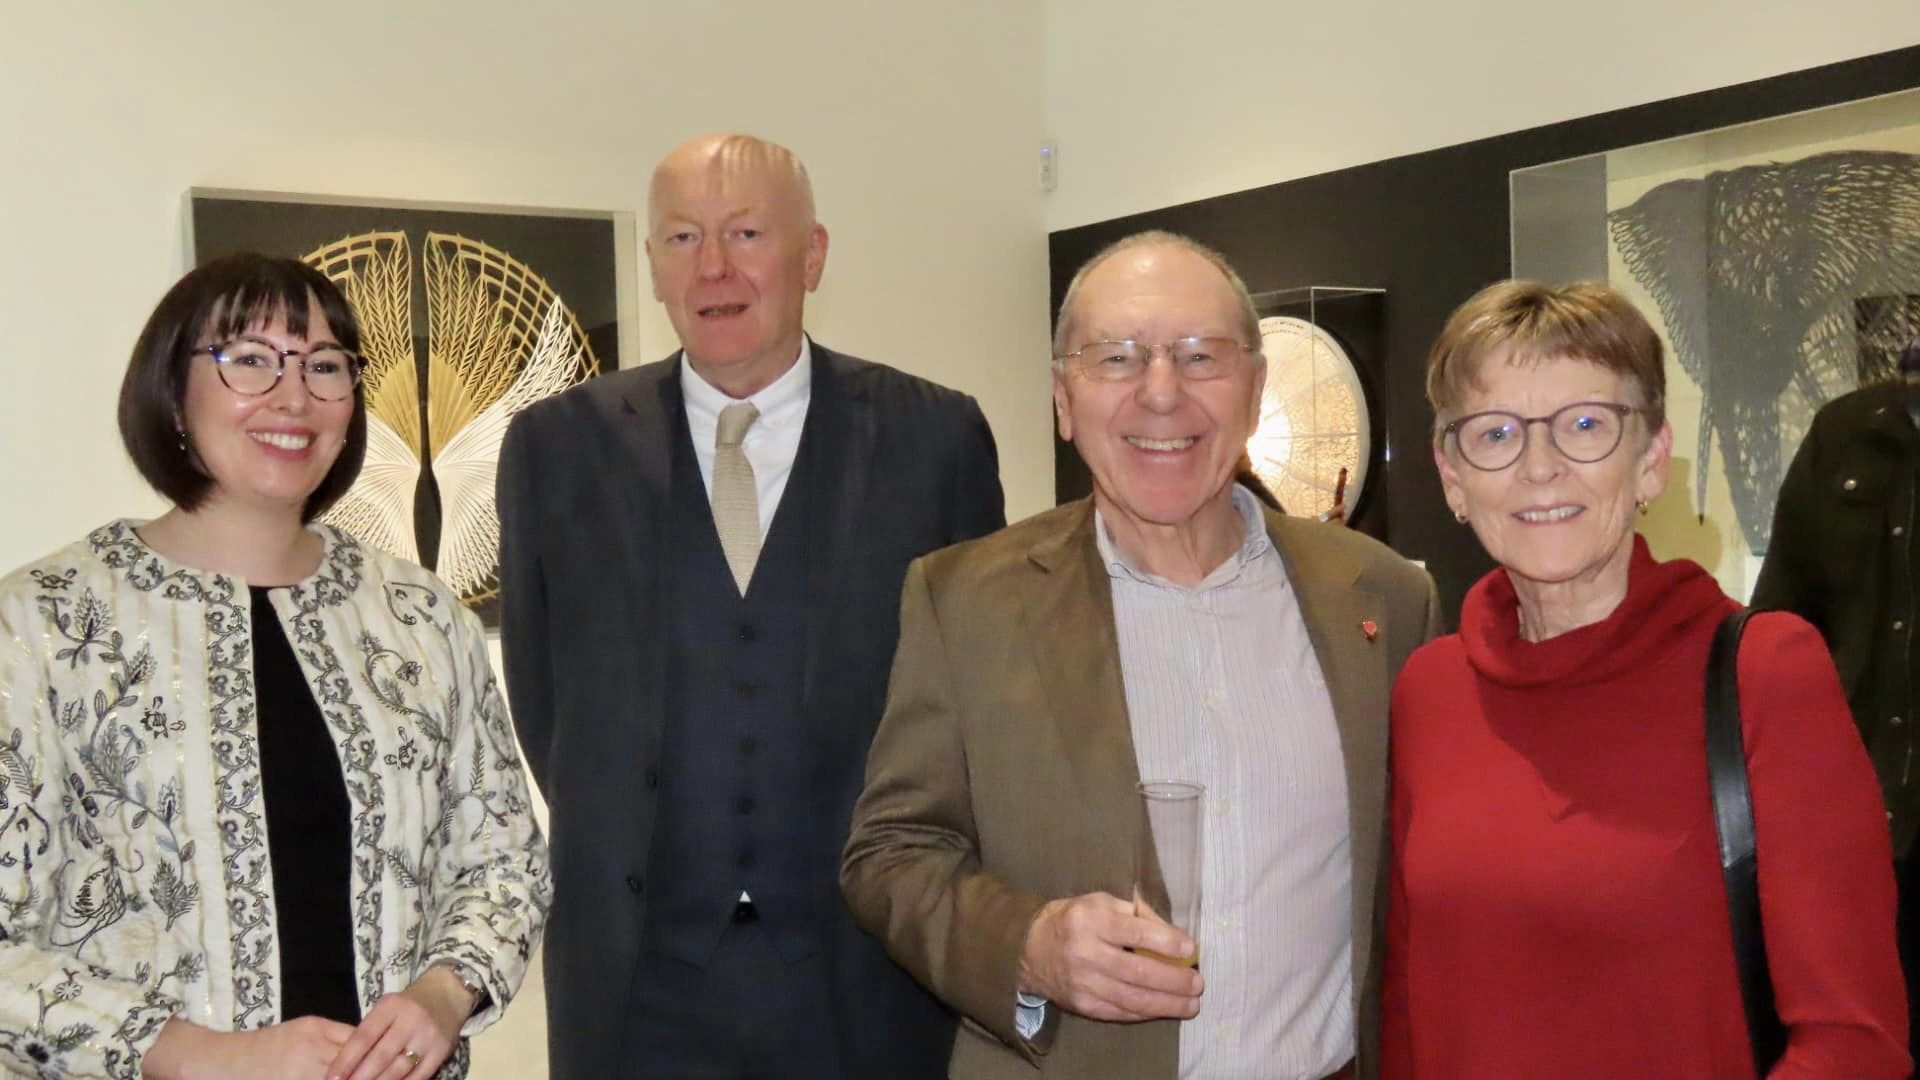 Guests enjoyed the launch night of the new The Many / Paper My Wishes exhibition by artist Suhail Shaikh at the Atkinson in Southport. Charlotte Buckingham (Marjeting Manager The Atkinson); Stephen Whittle (Museums Manager The Atkinson); Mr and Mrs Bryden (The Atkinson Development Trust). 